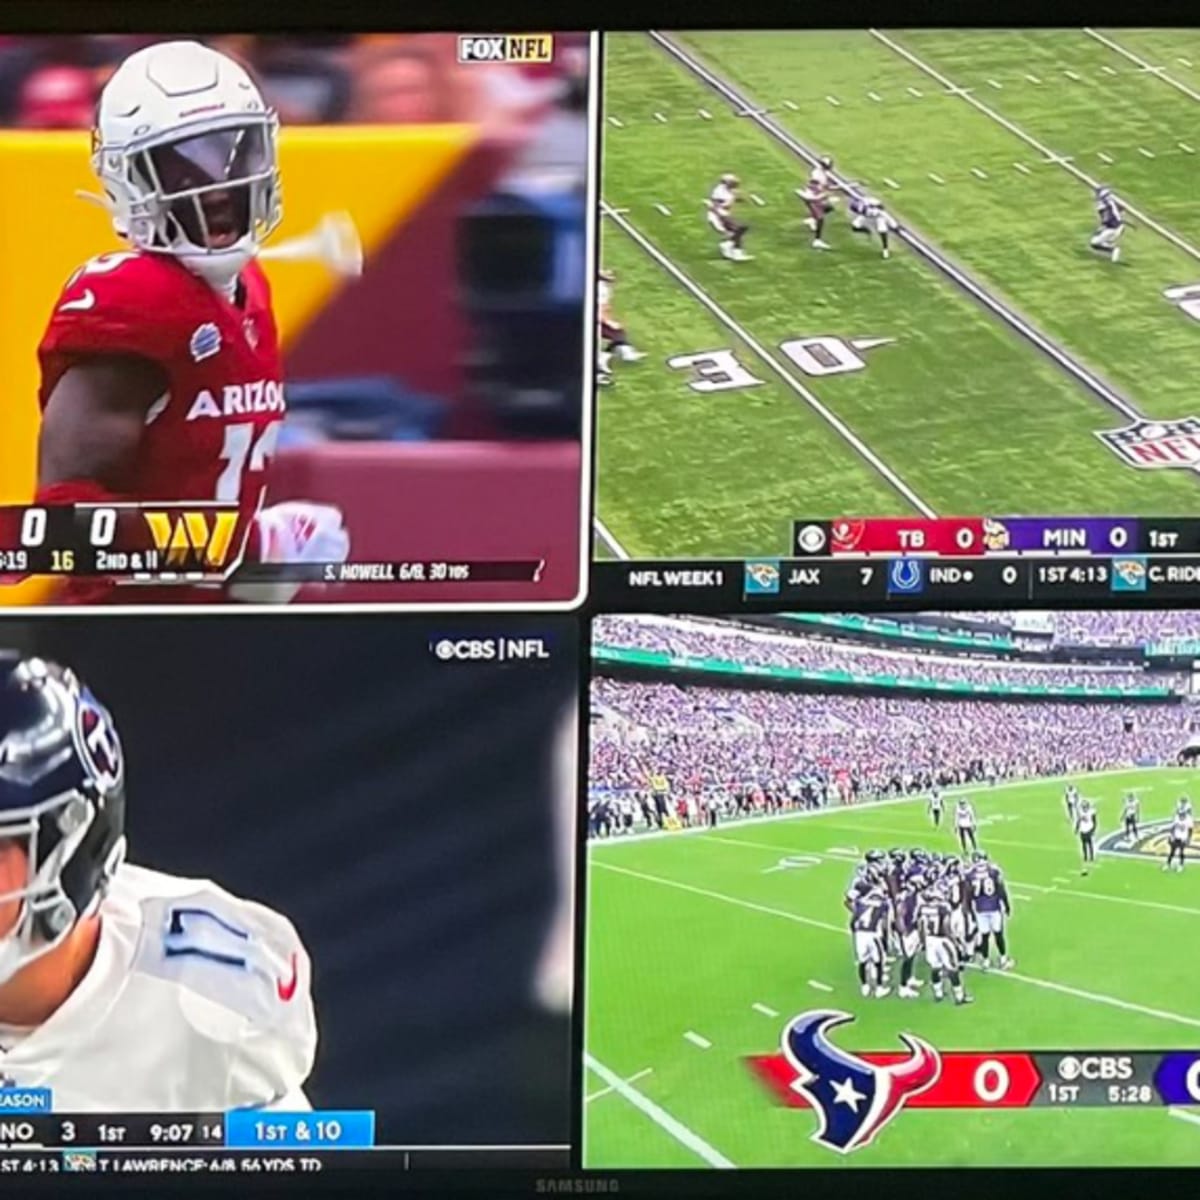 nfl sunday ticket in my area